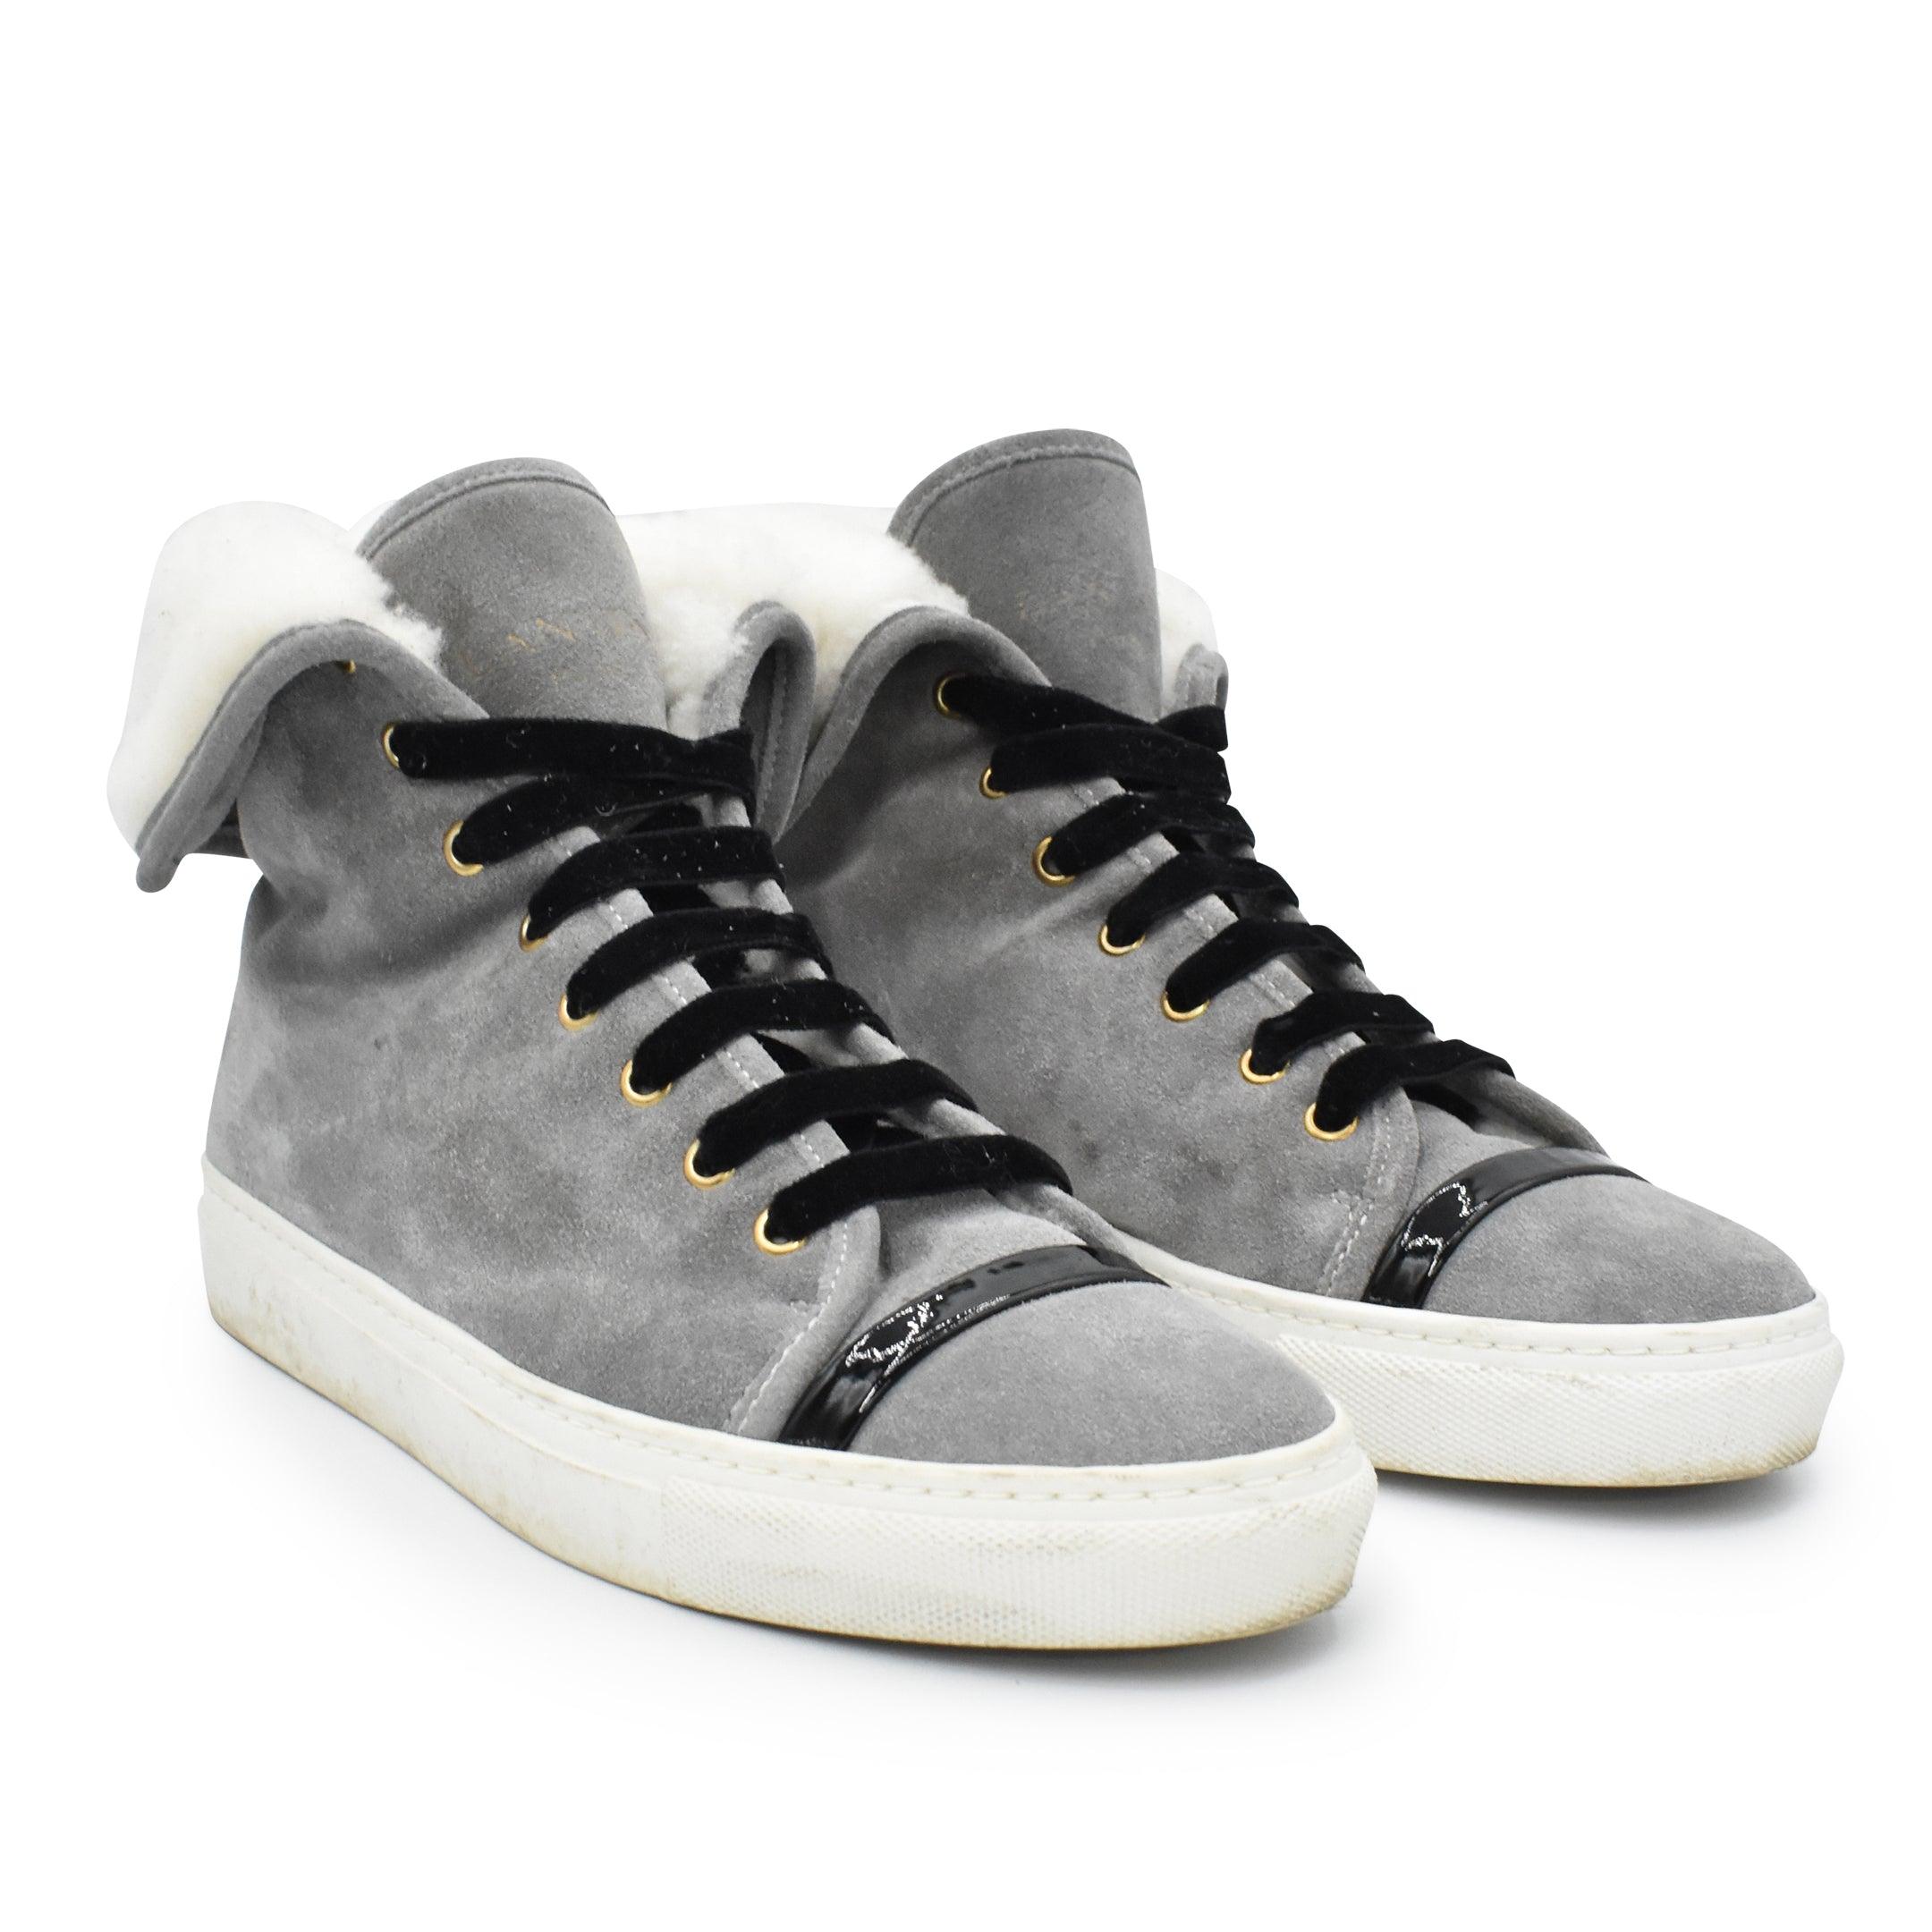 Lanvin High-Top Sneakers - Women's 37 - Fashionably Yours